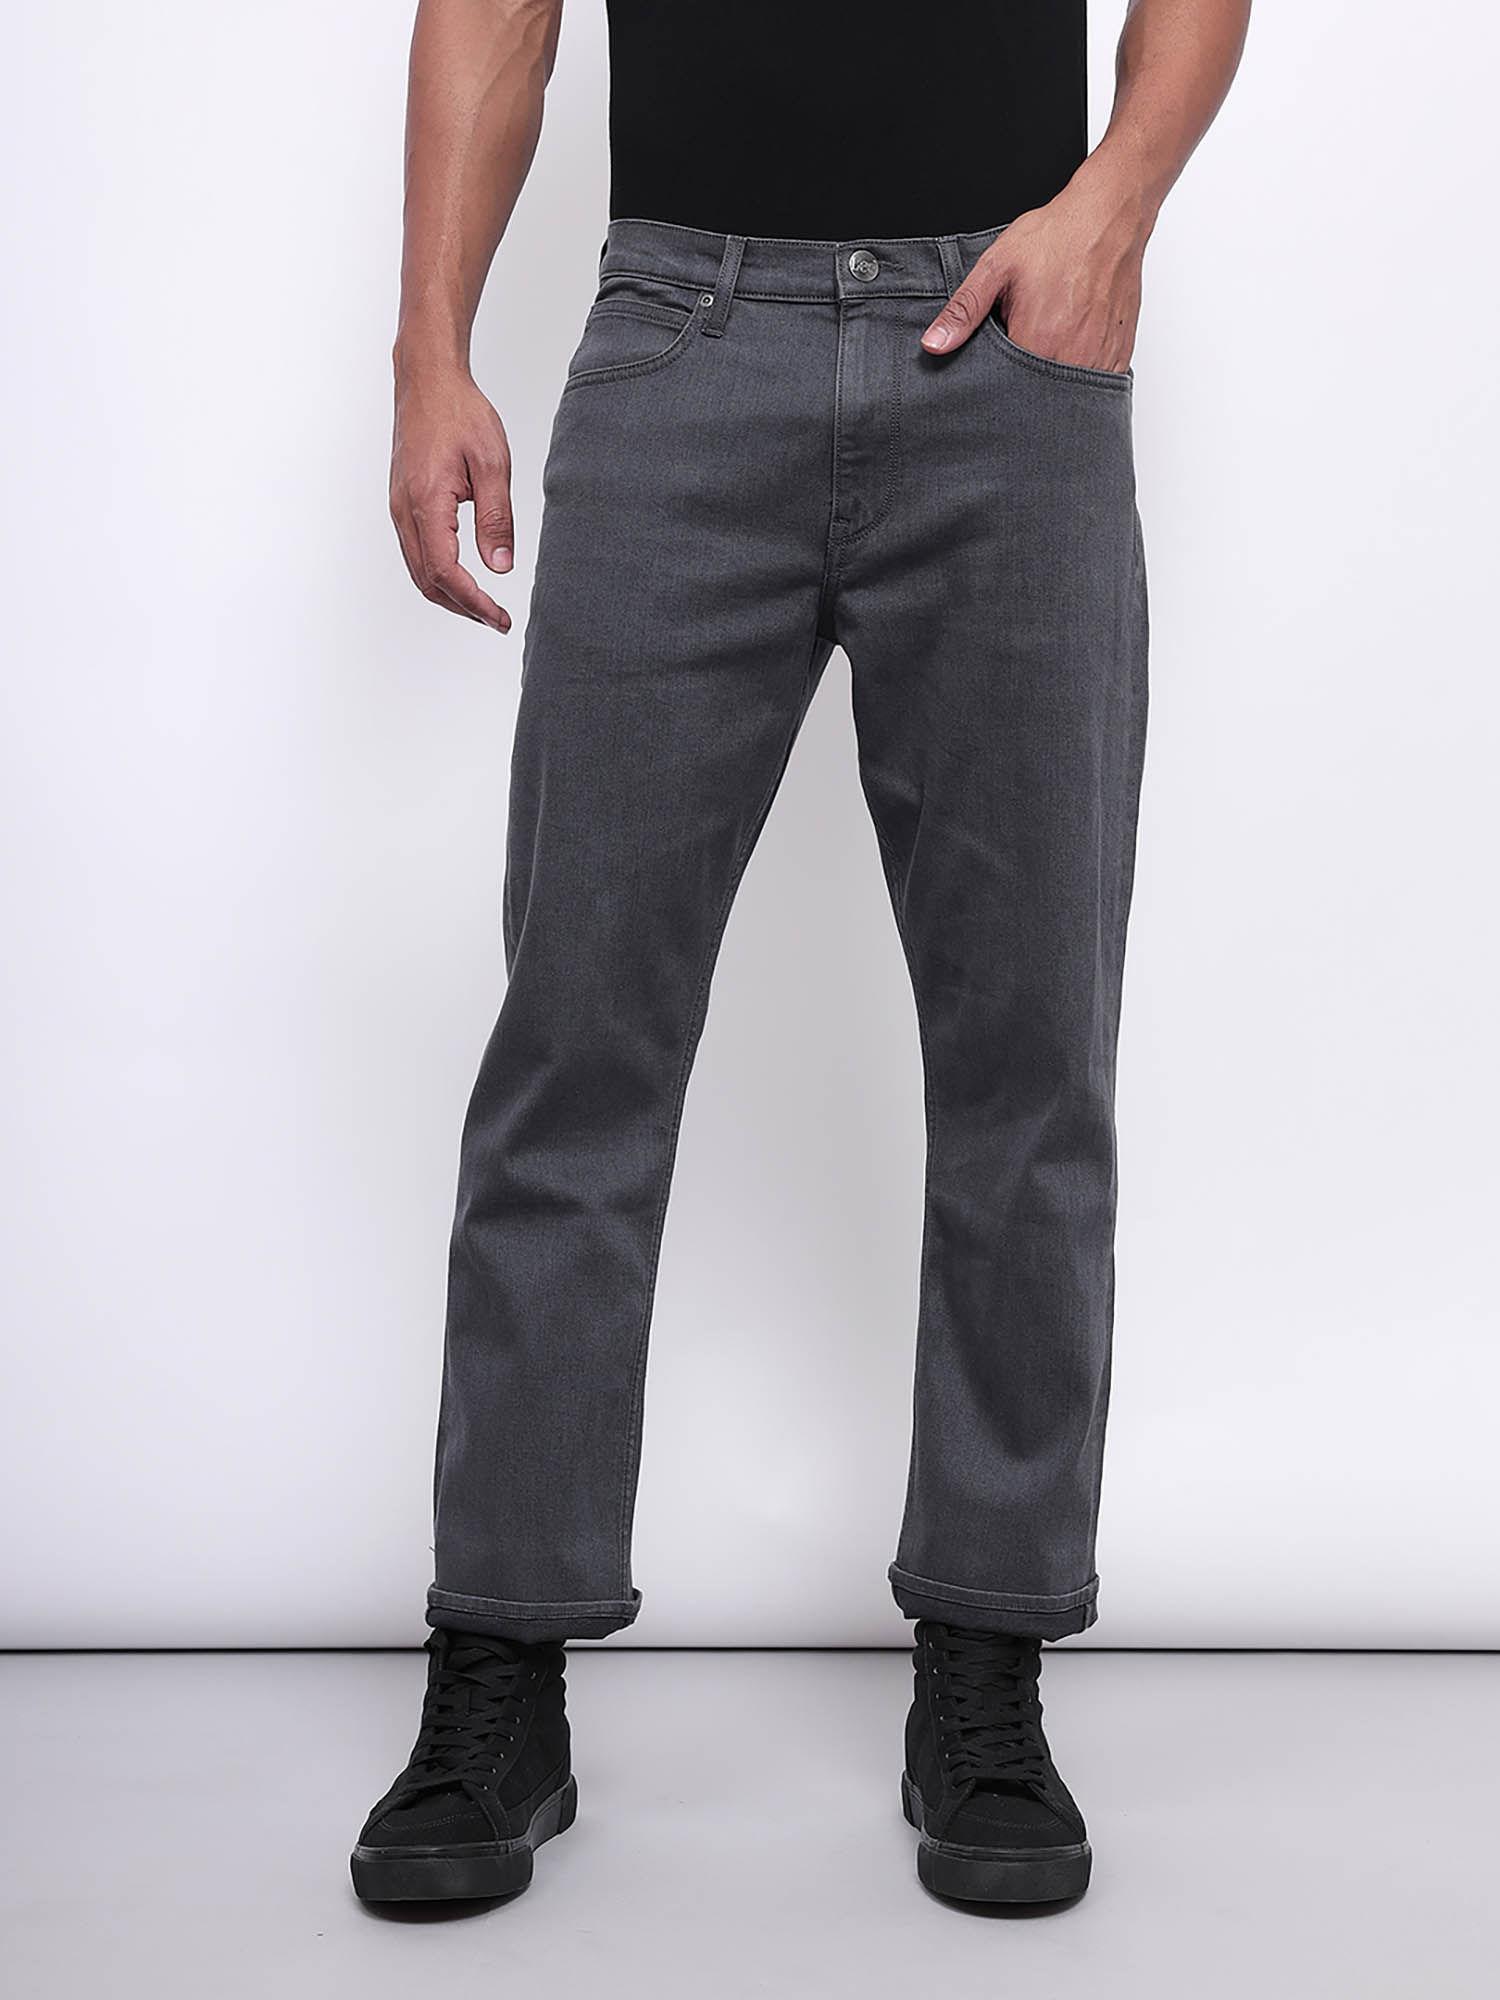 mens rodeo grey jeans